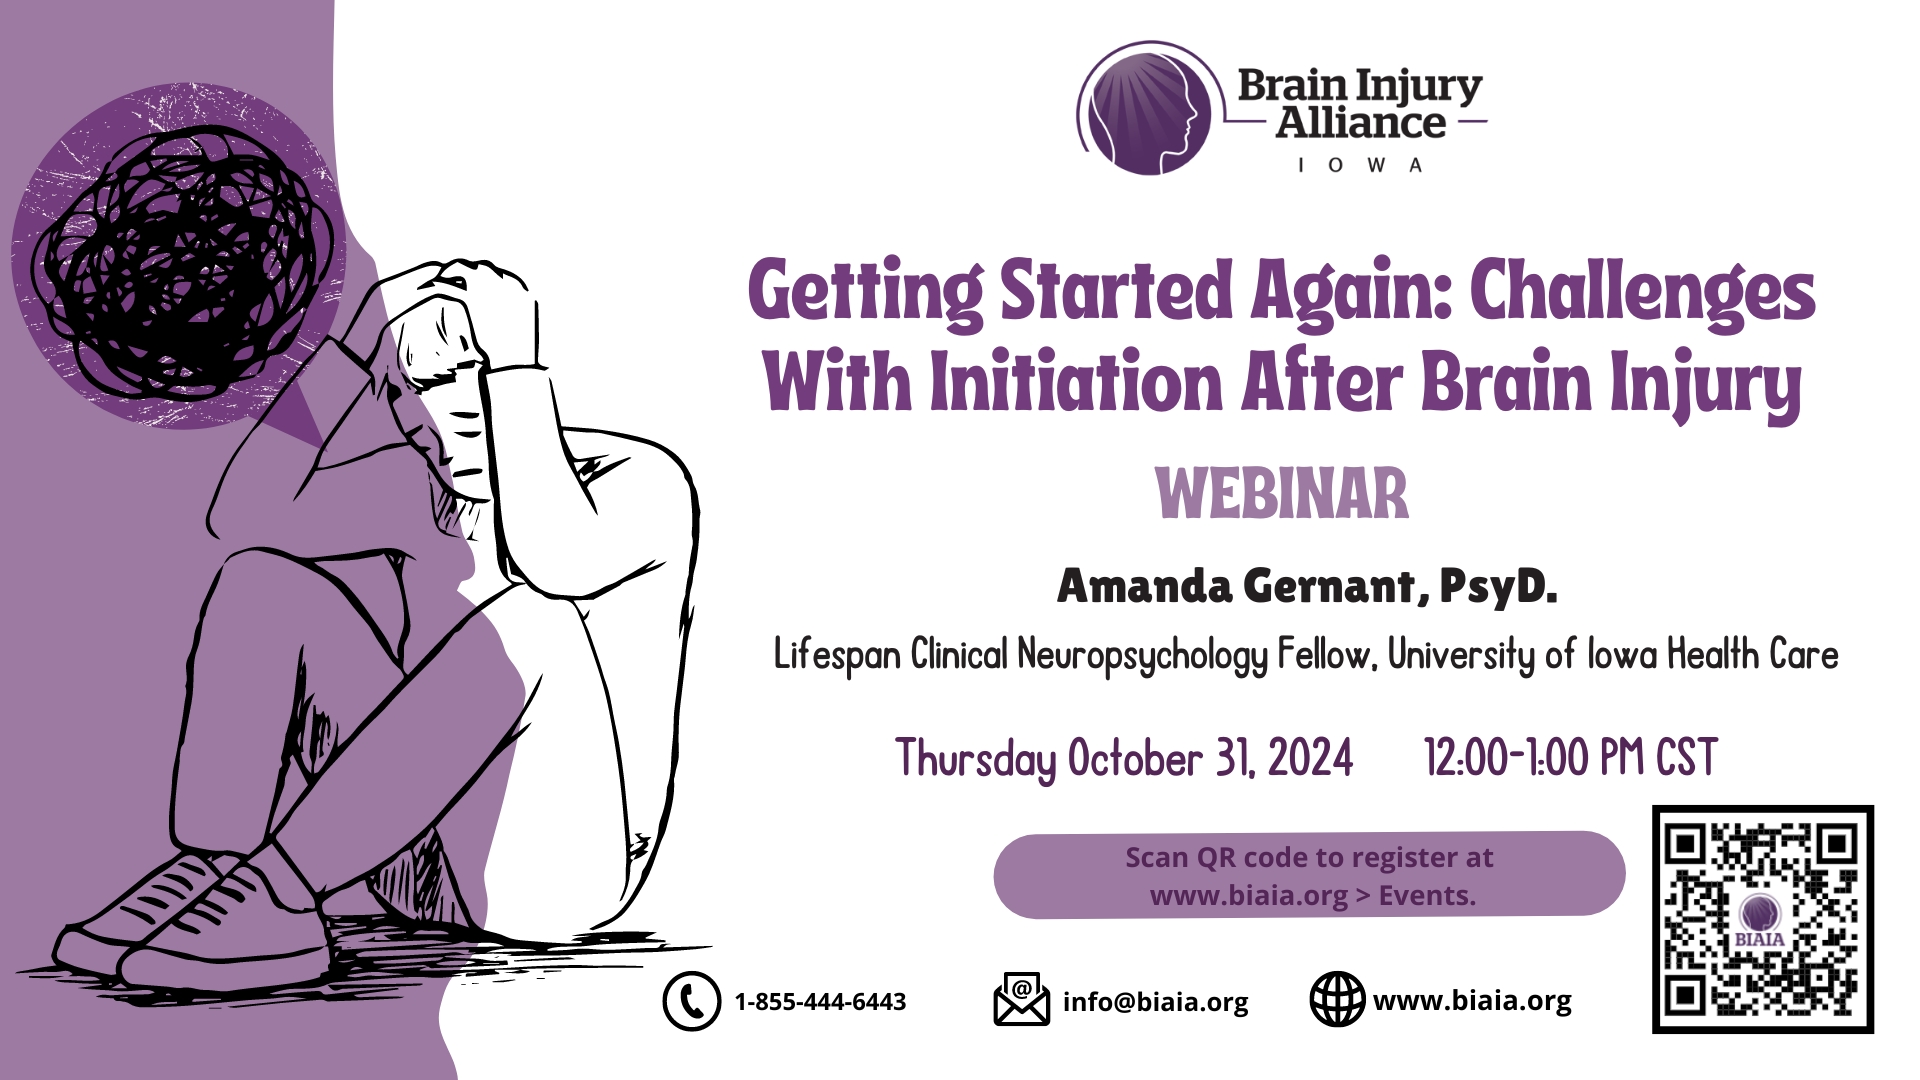 Getting Started Again: Challenges With Initiation After Brain Injury